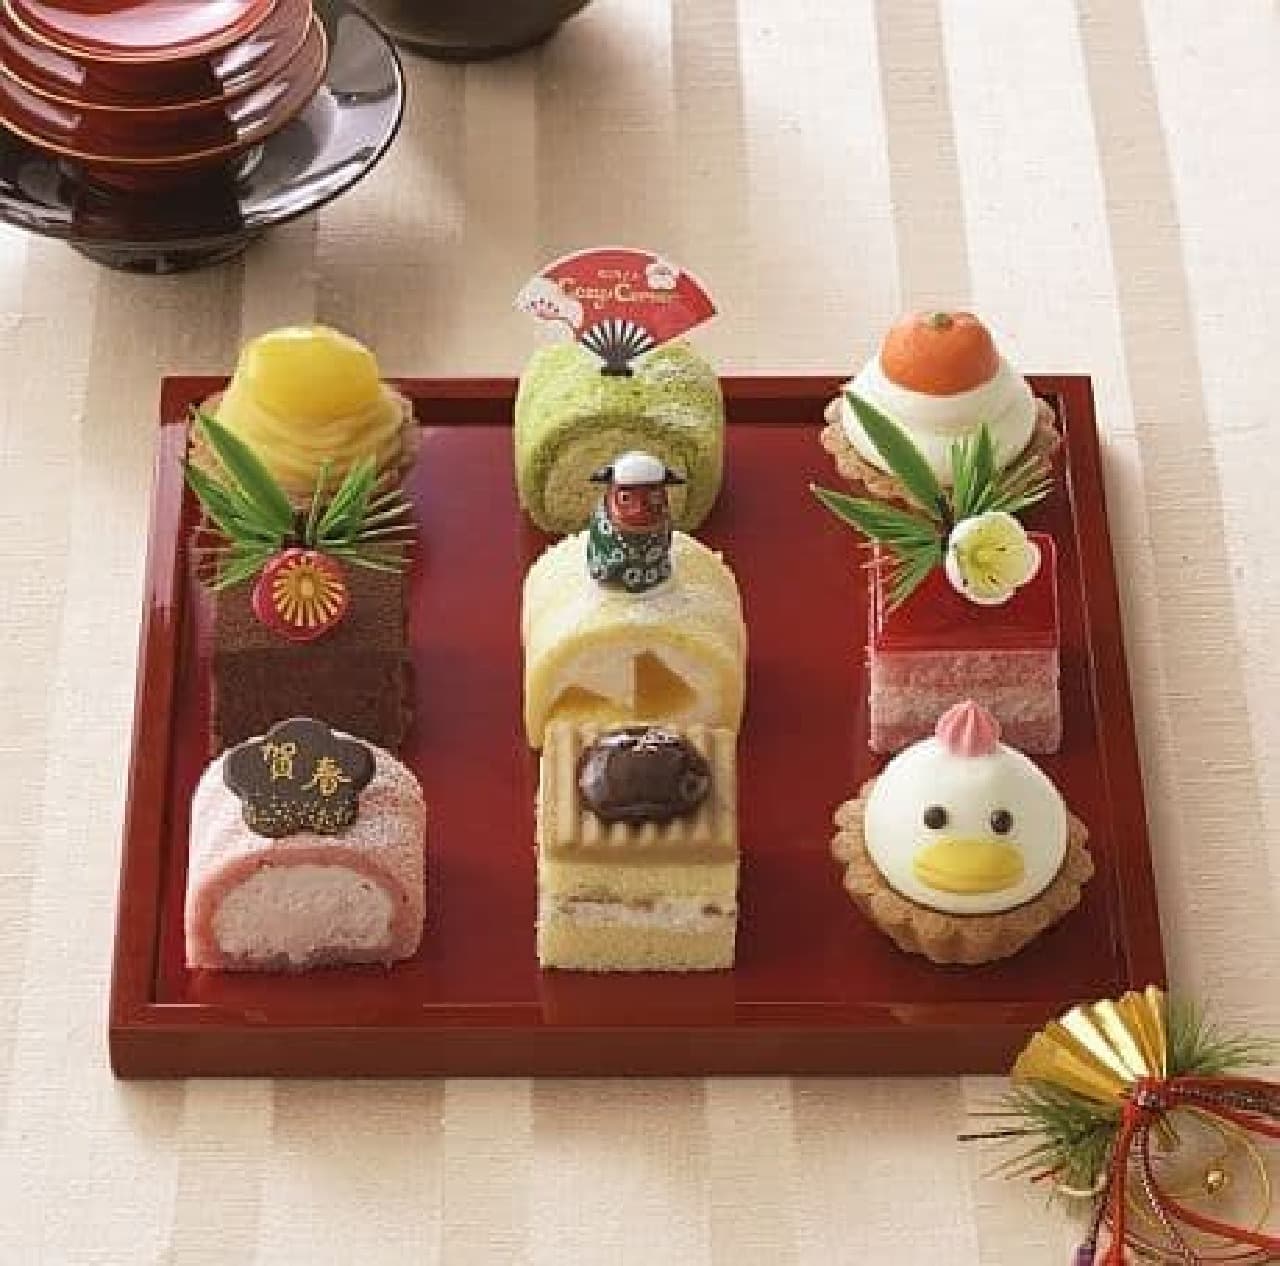 Ginza Cozy Corner "Sweets New Year dishes"